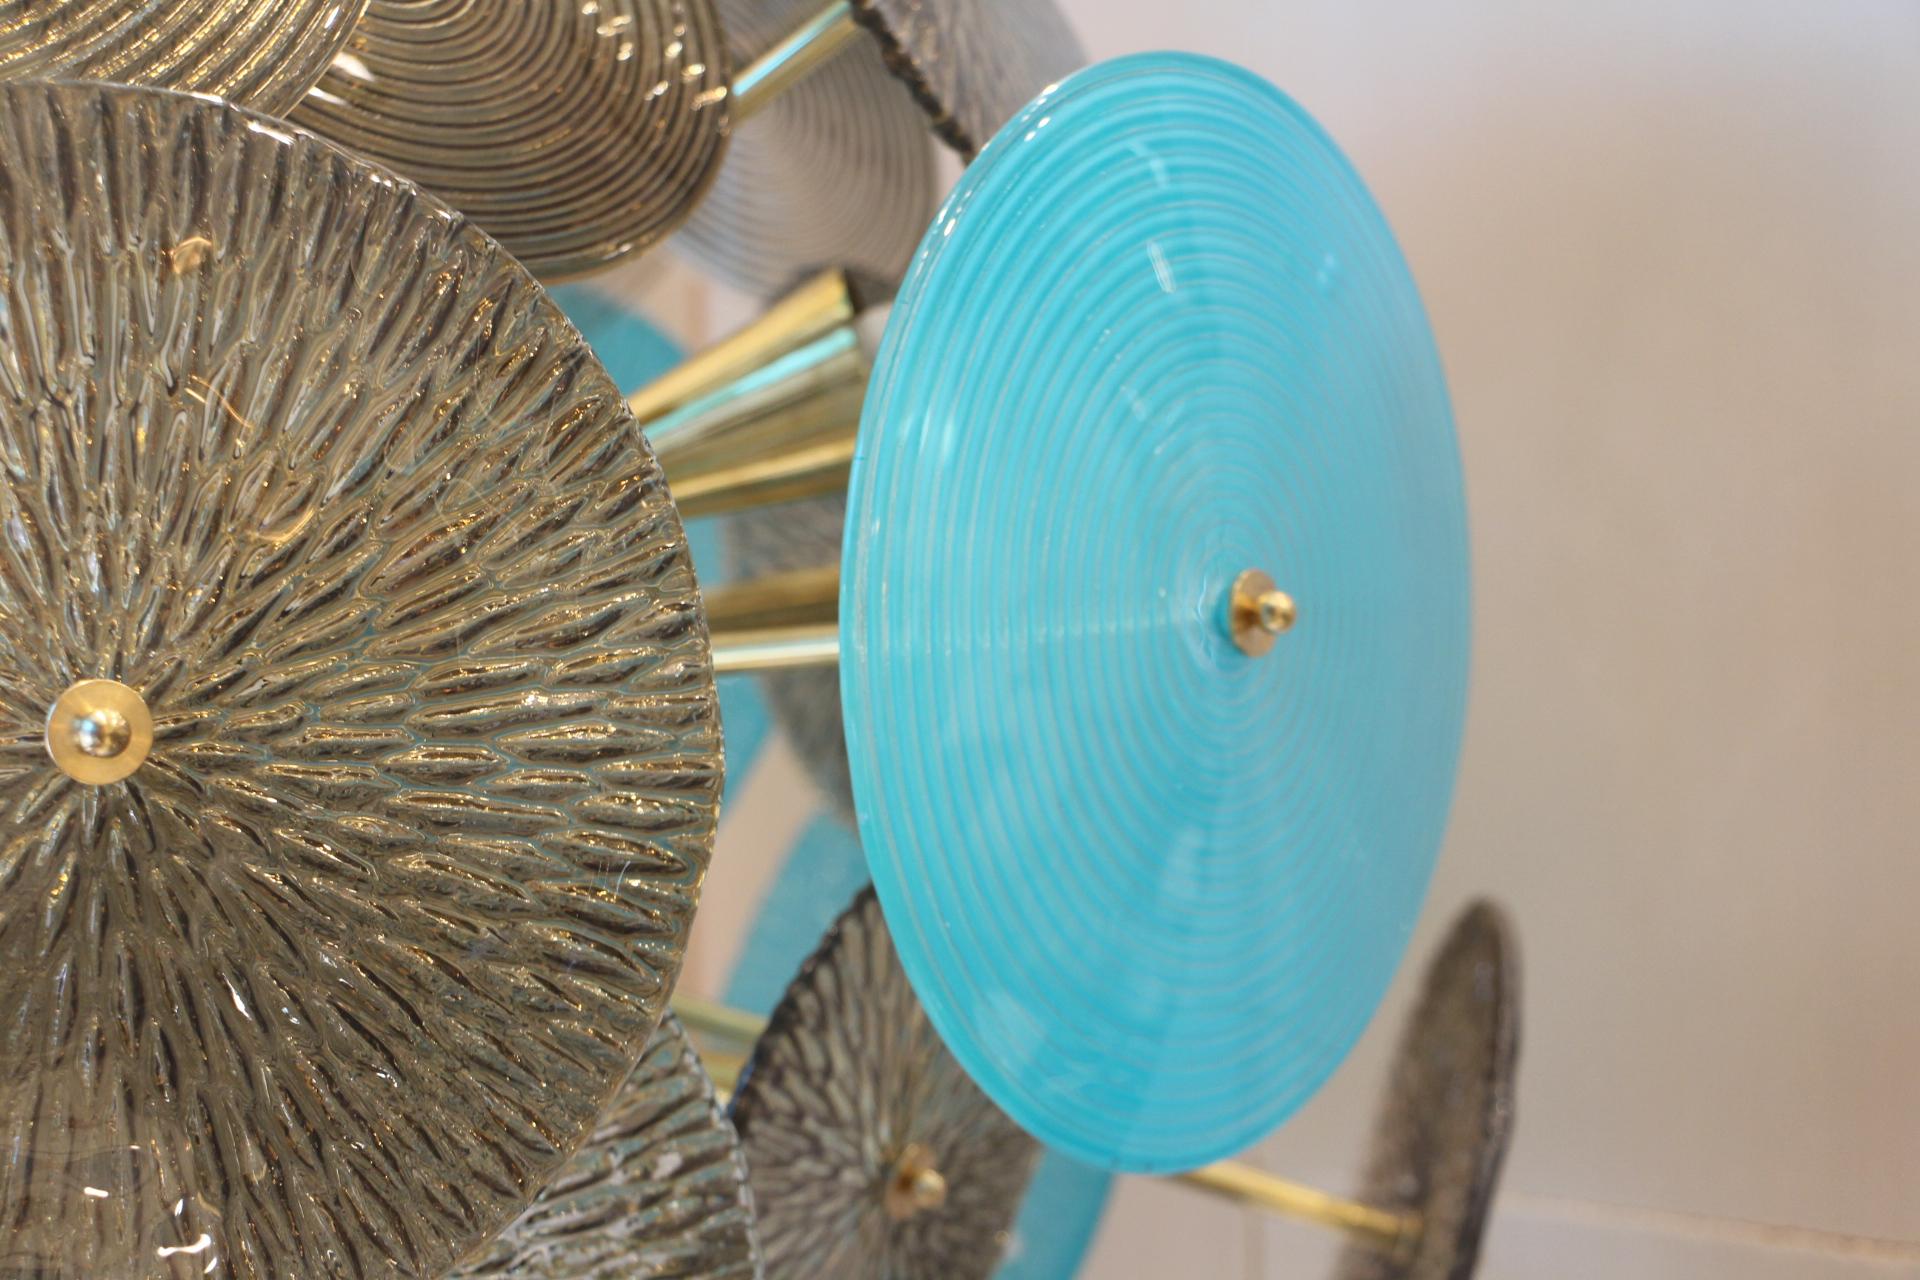 Turquoise and Gold Sputnik Chandelier with Murano Glass Disks 2